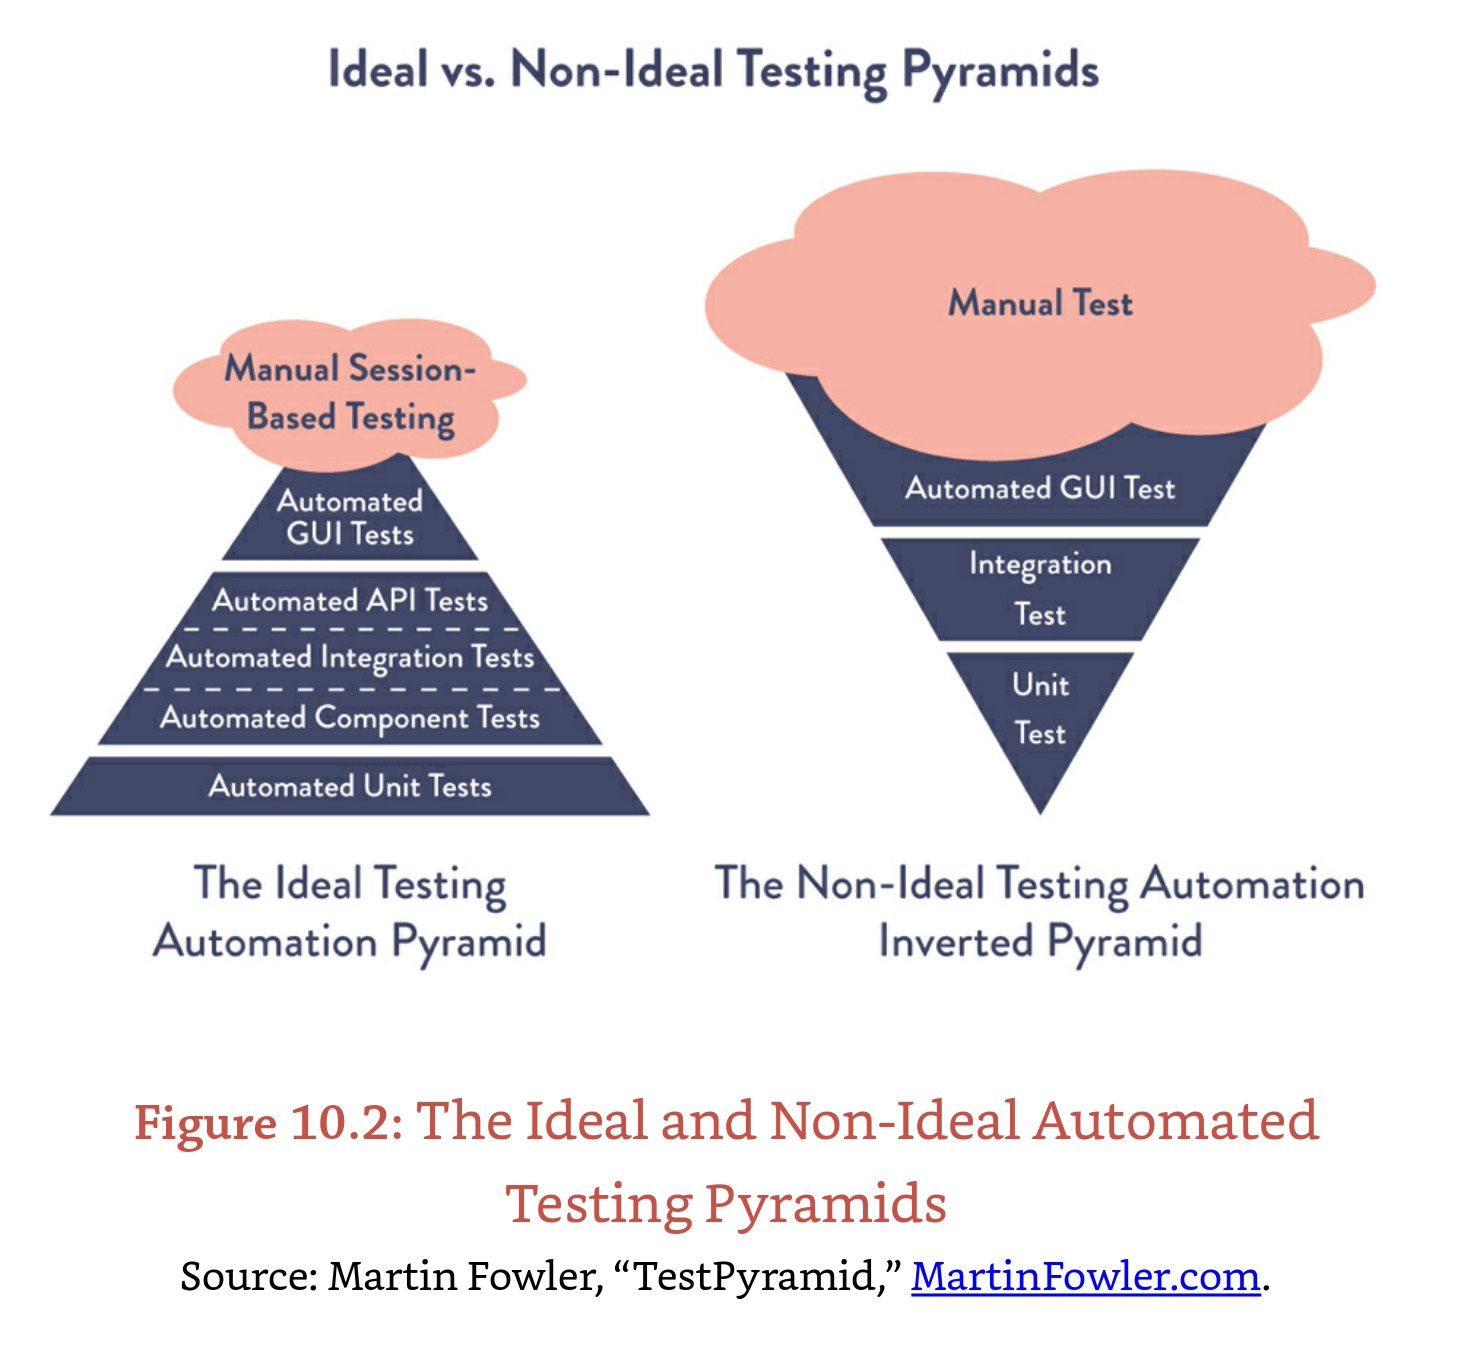 Pyramid shape showing the different levels of testing comparing their speed to receive feedback